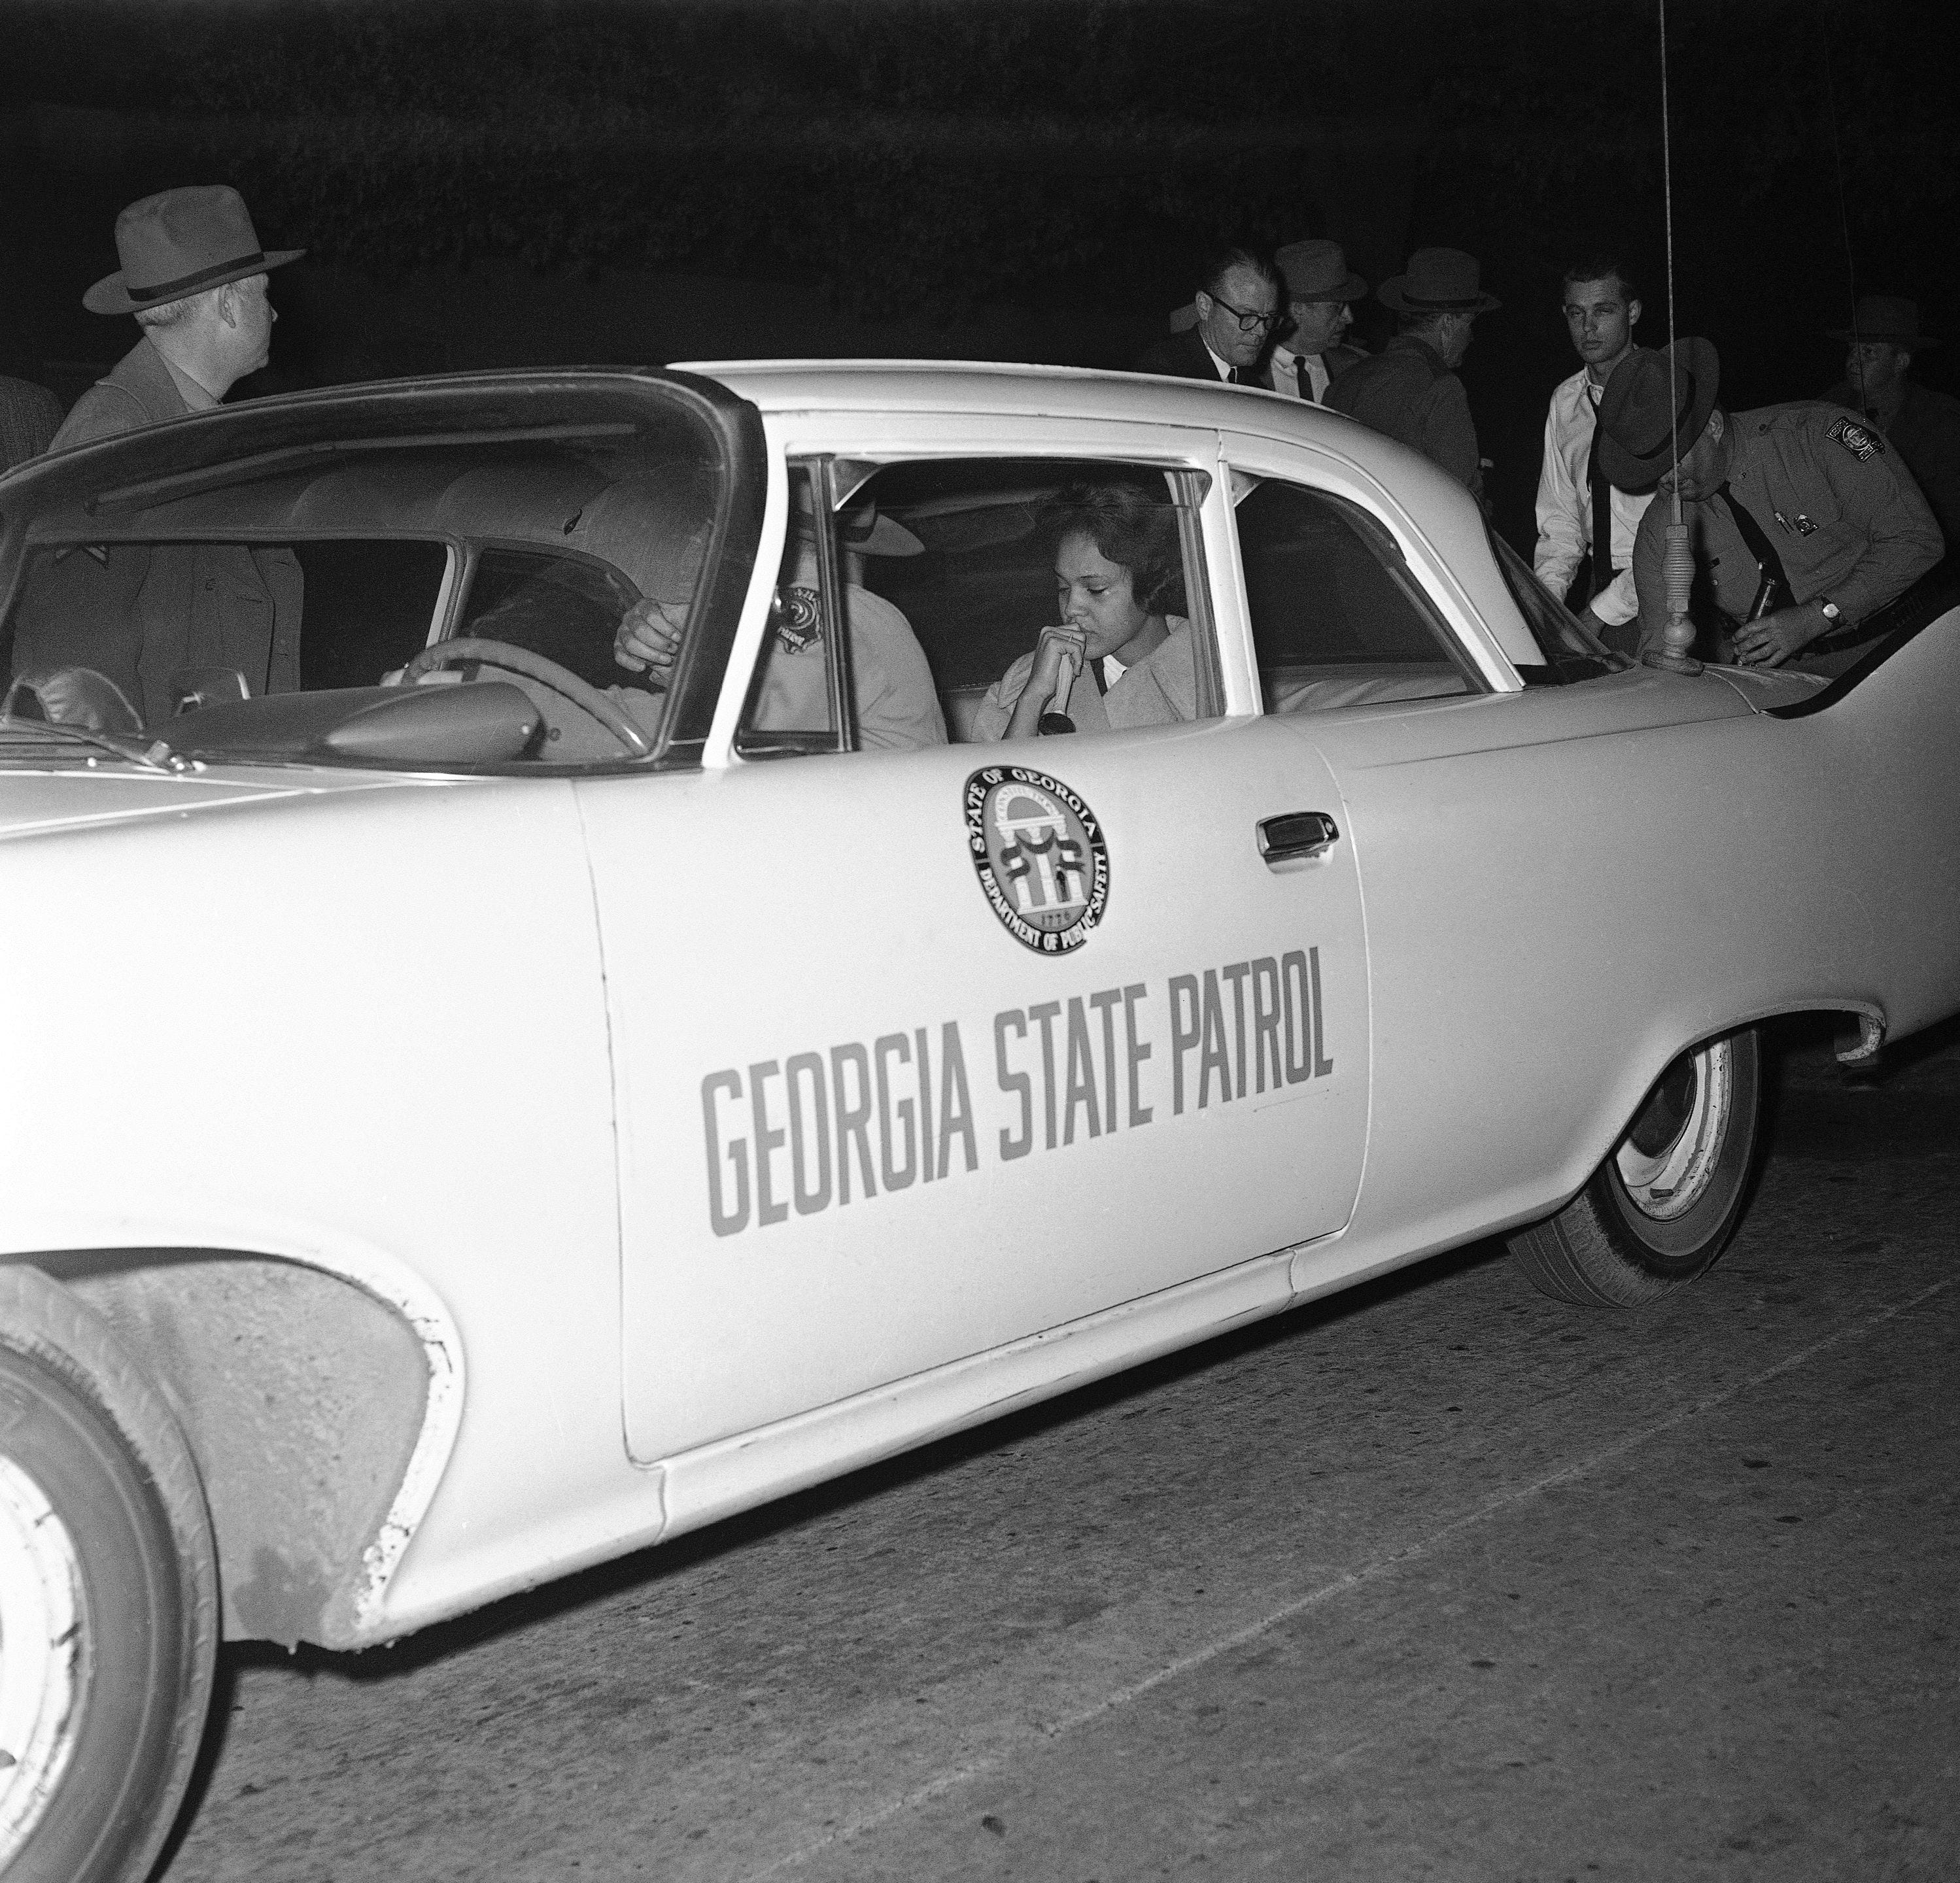 Charlayne Hunter, 18, who started classes at the University of Georgia under federal order, was escorted by a highway patrol officer for her own protection when students staged an uprising against the integration, Jan. 12, 1961.